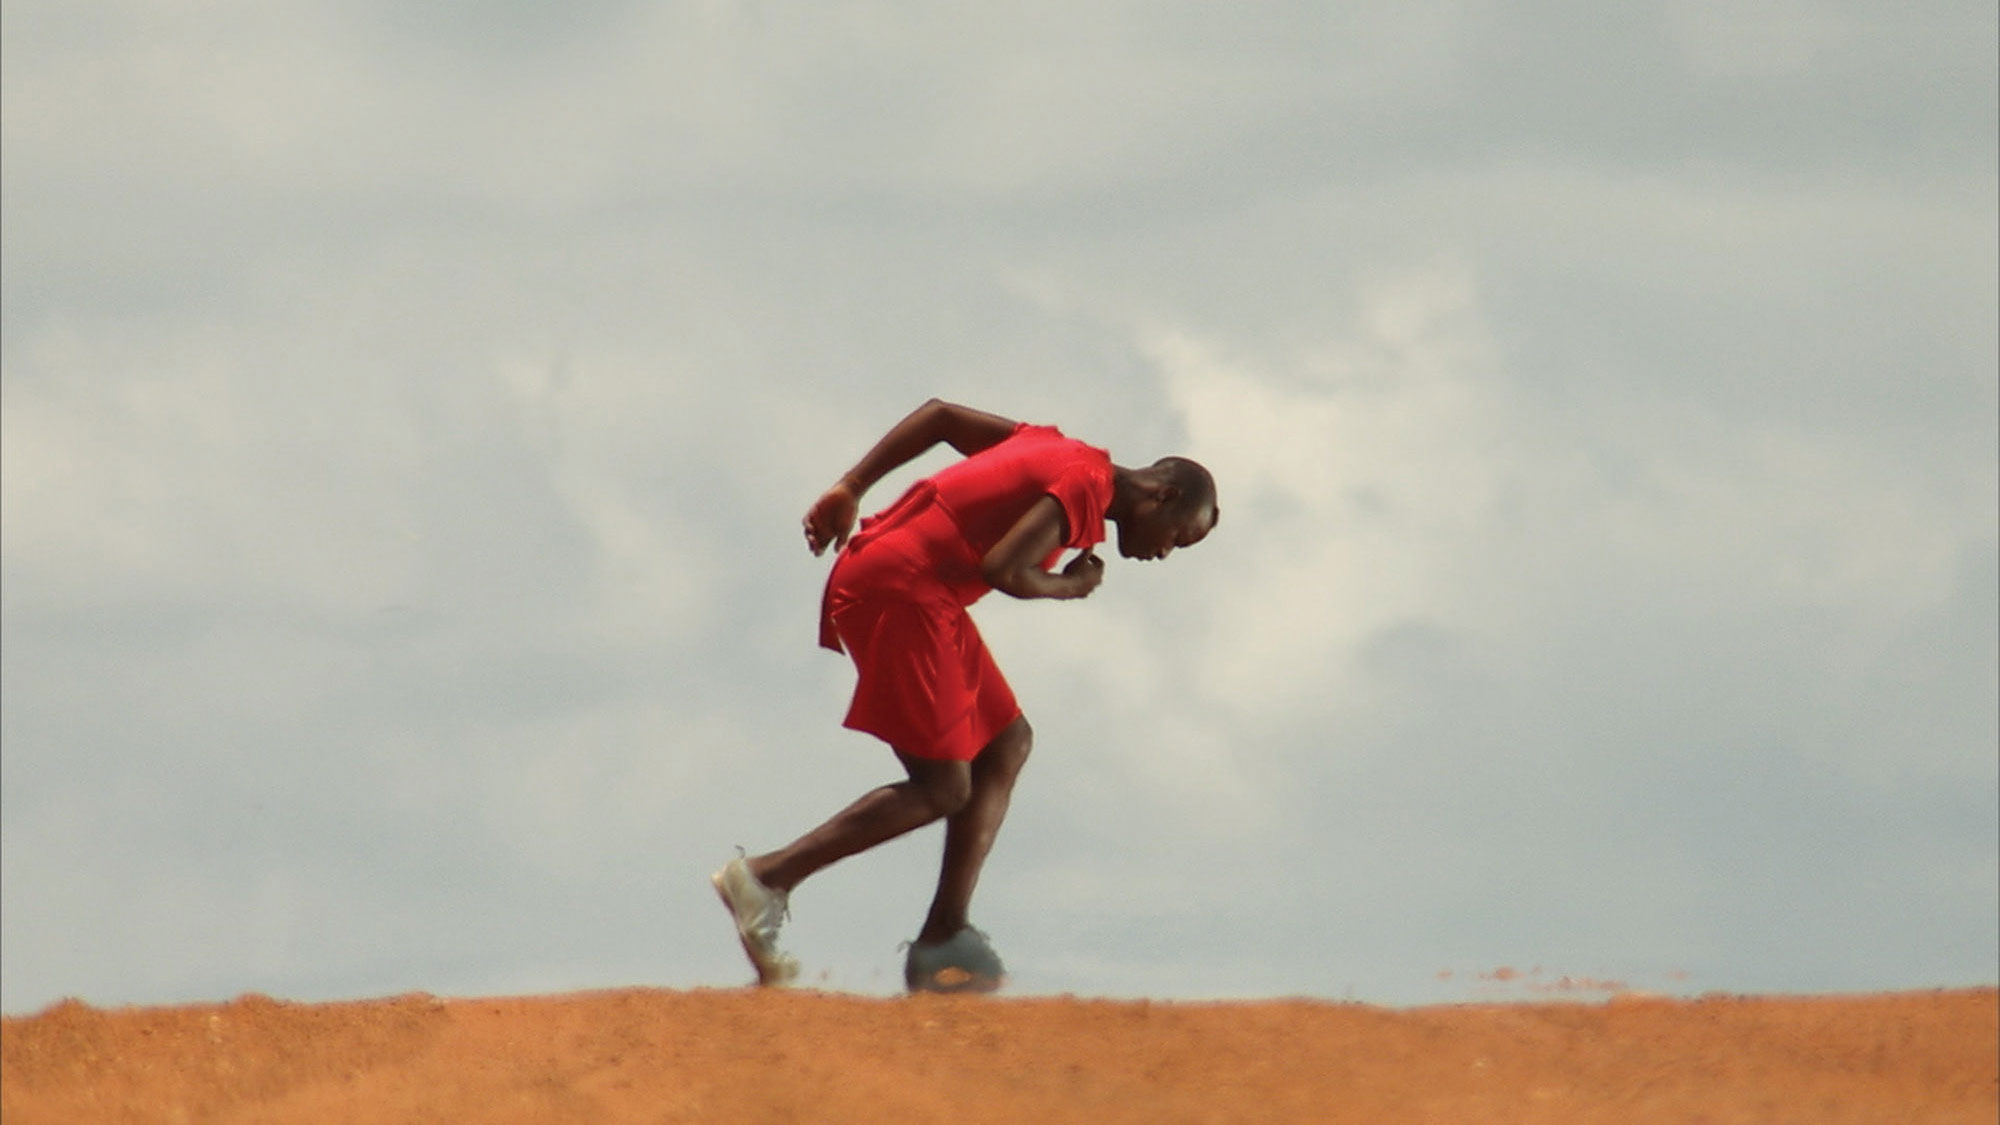 A Black person wearing red hunched in motion in a desert scene. 